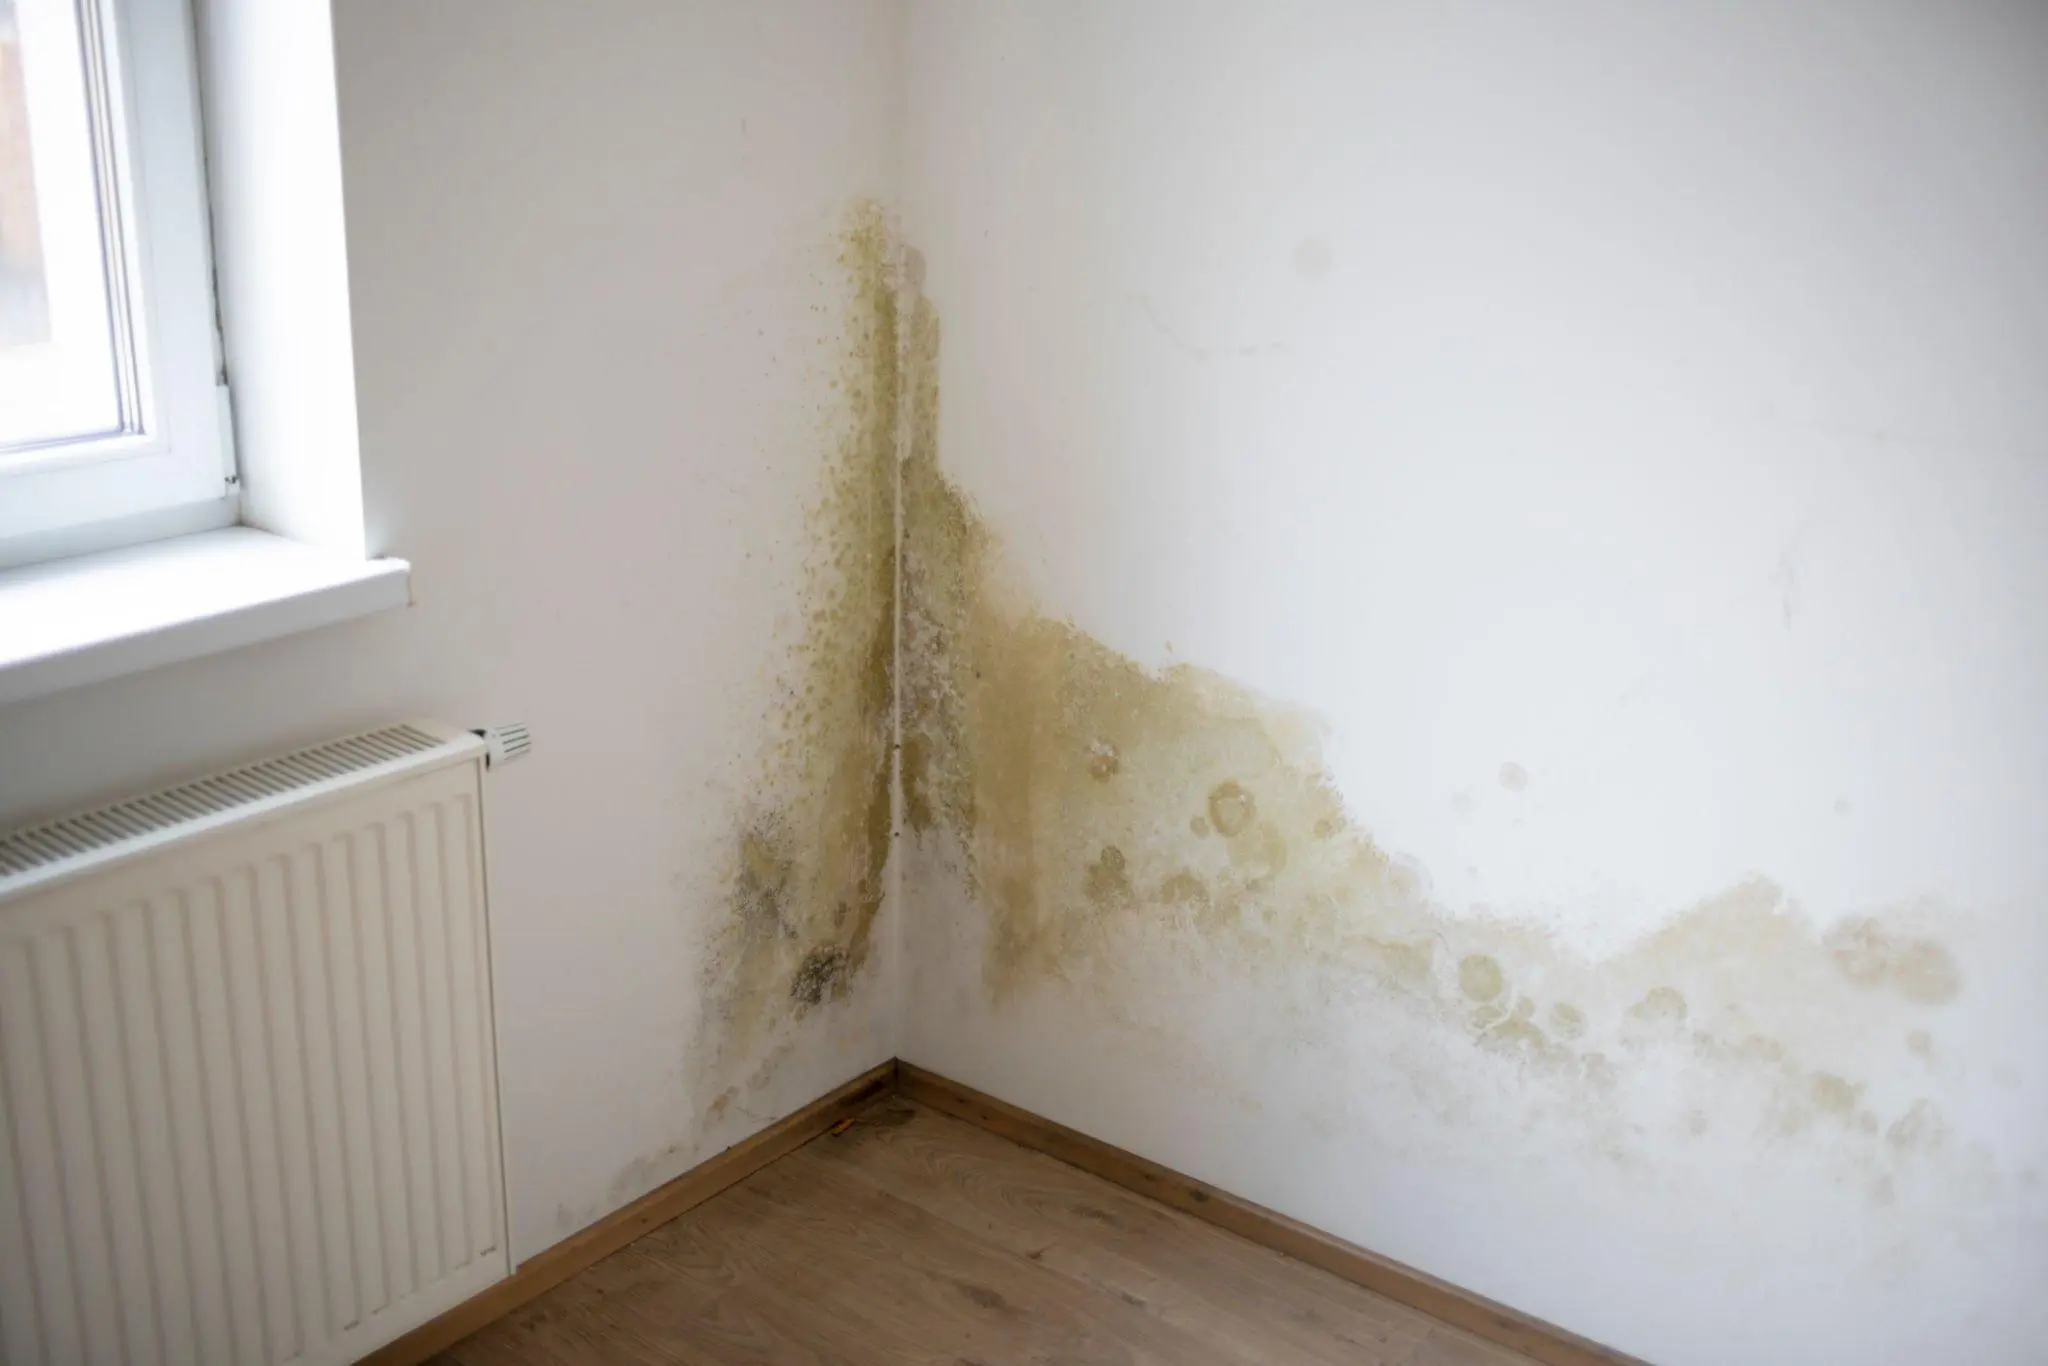 Can You Sleep in a Room With Mould?